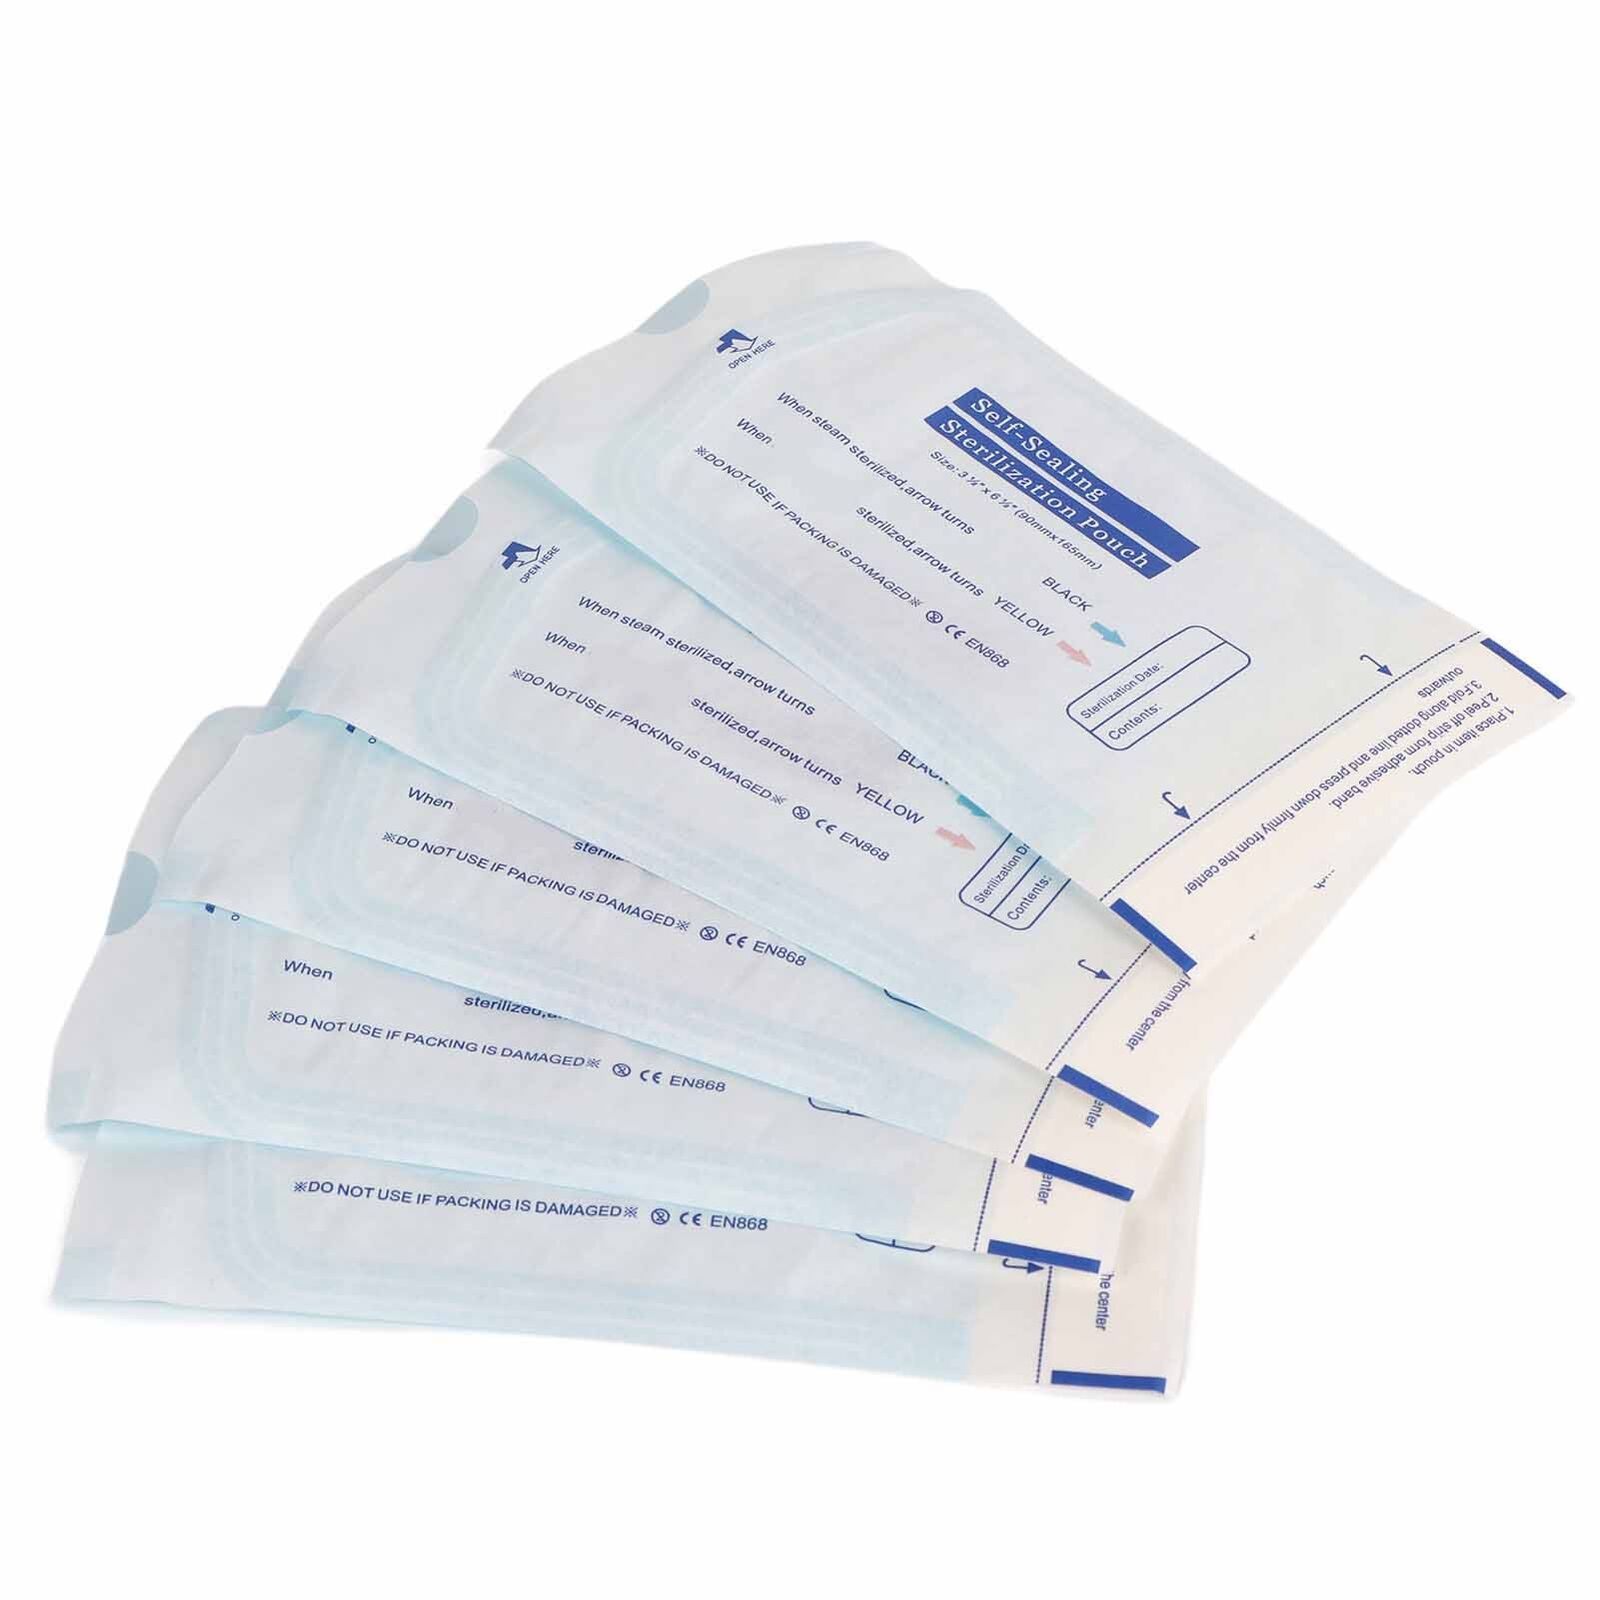 200pcs / Box Disposable Self Sealing Cleaning Pouch For Dental Materials Too AP9